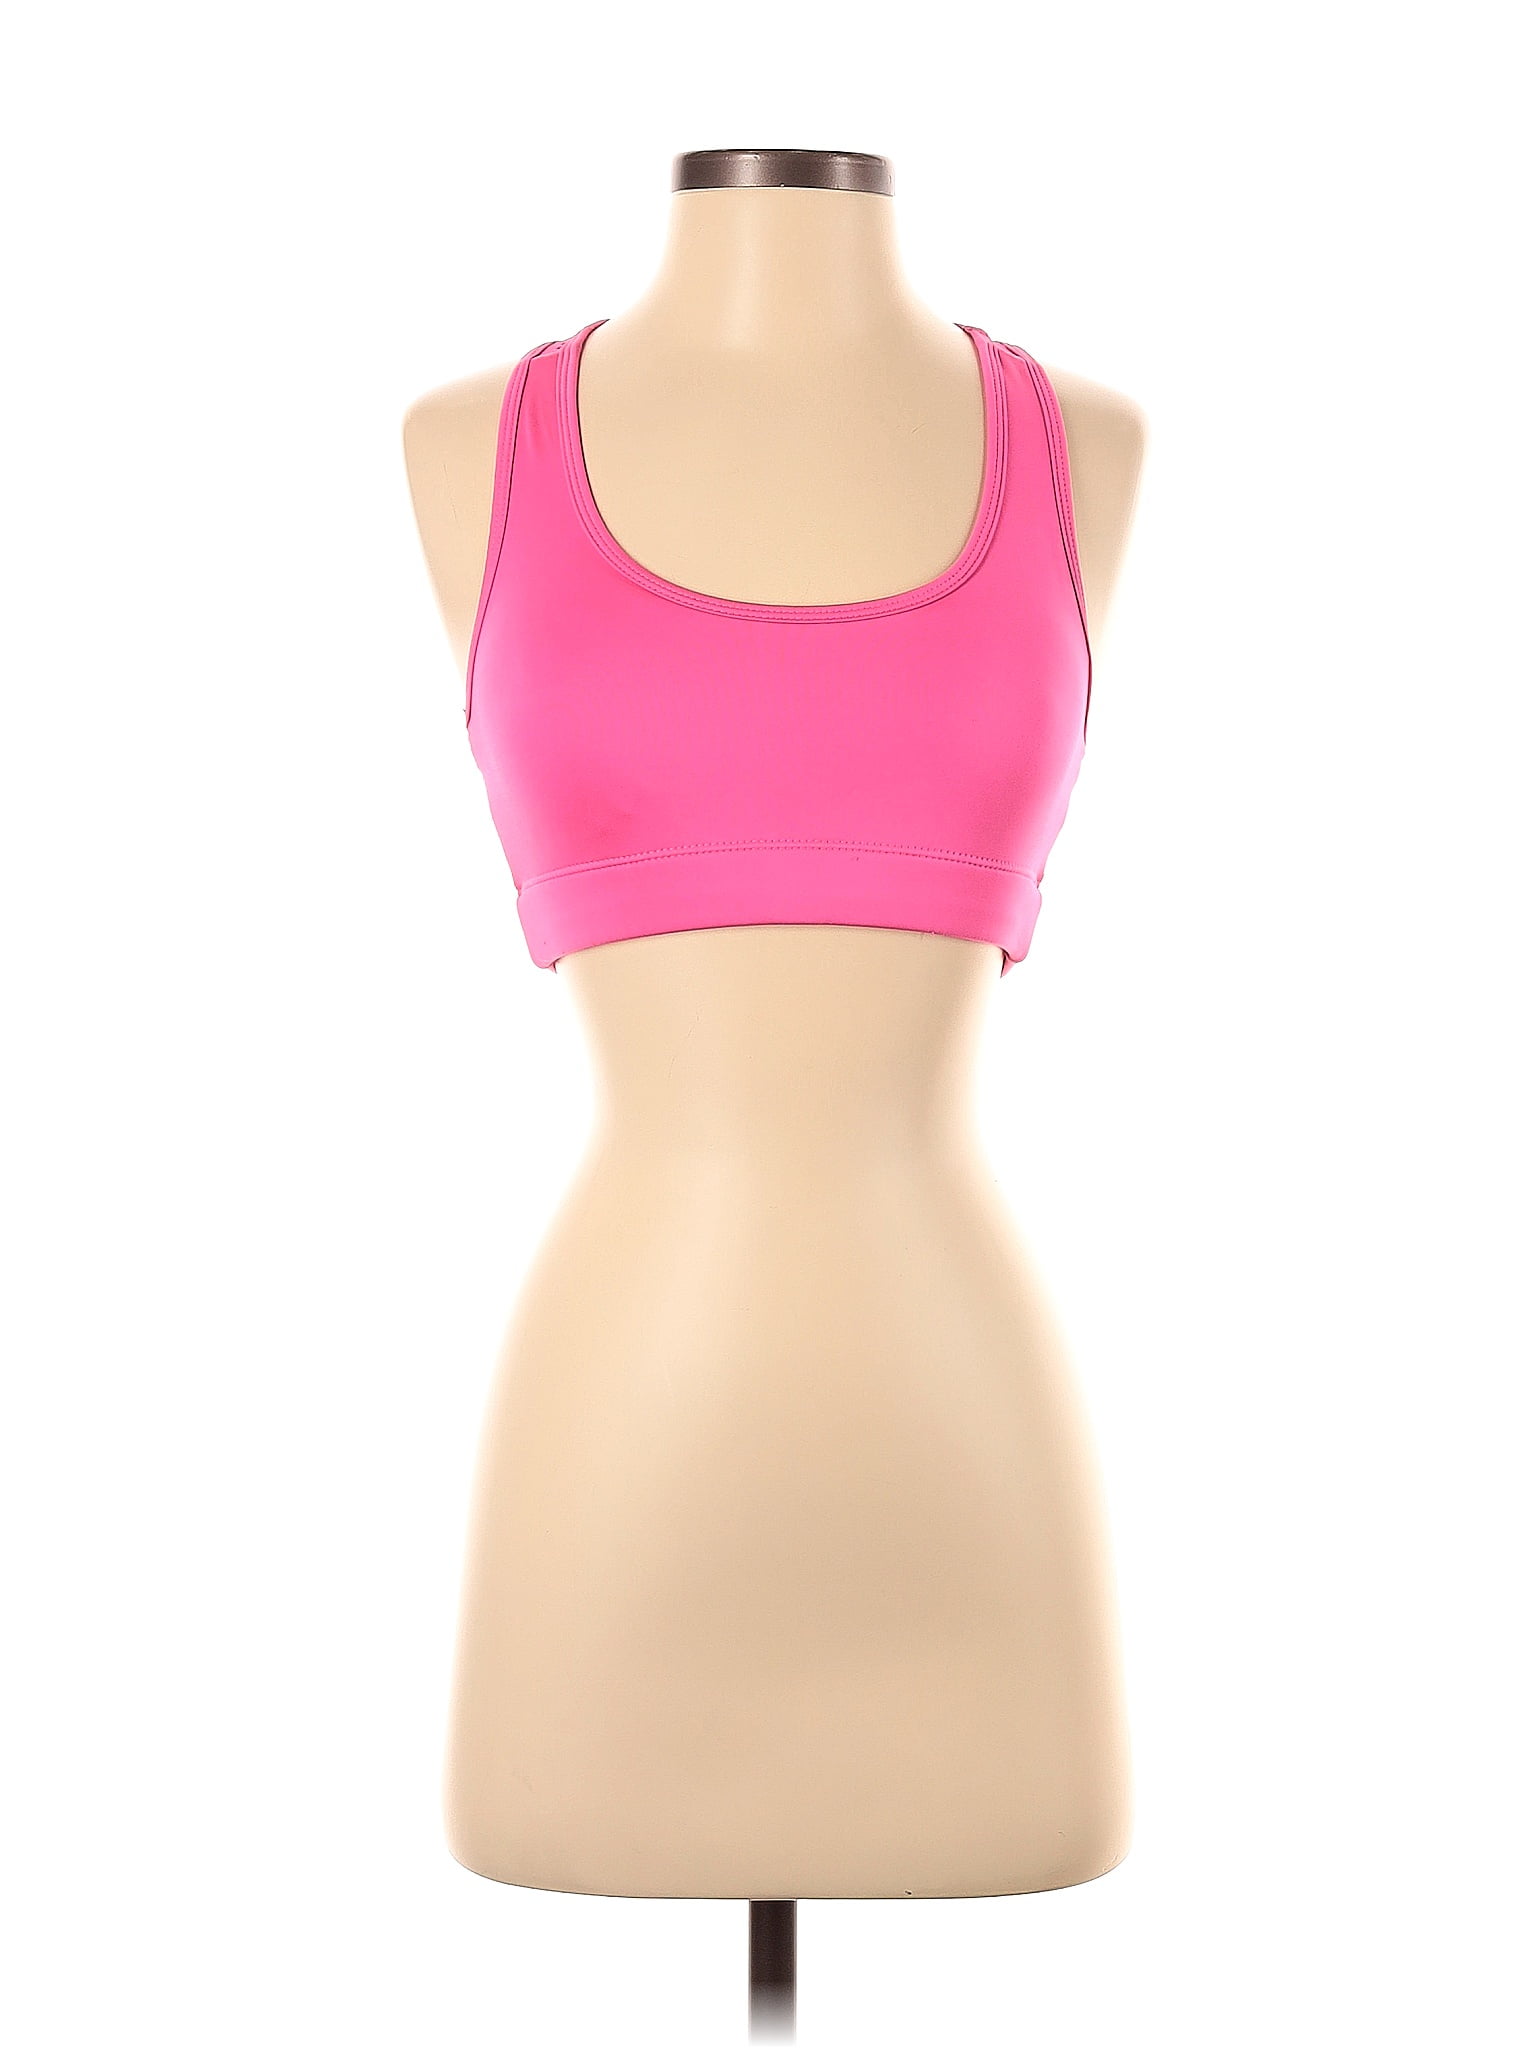 Zyia Active Pink Sports Bra Size XS - 78% off